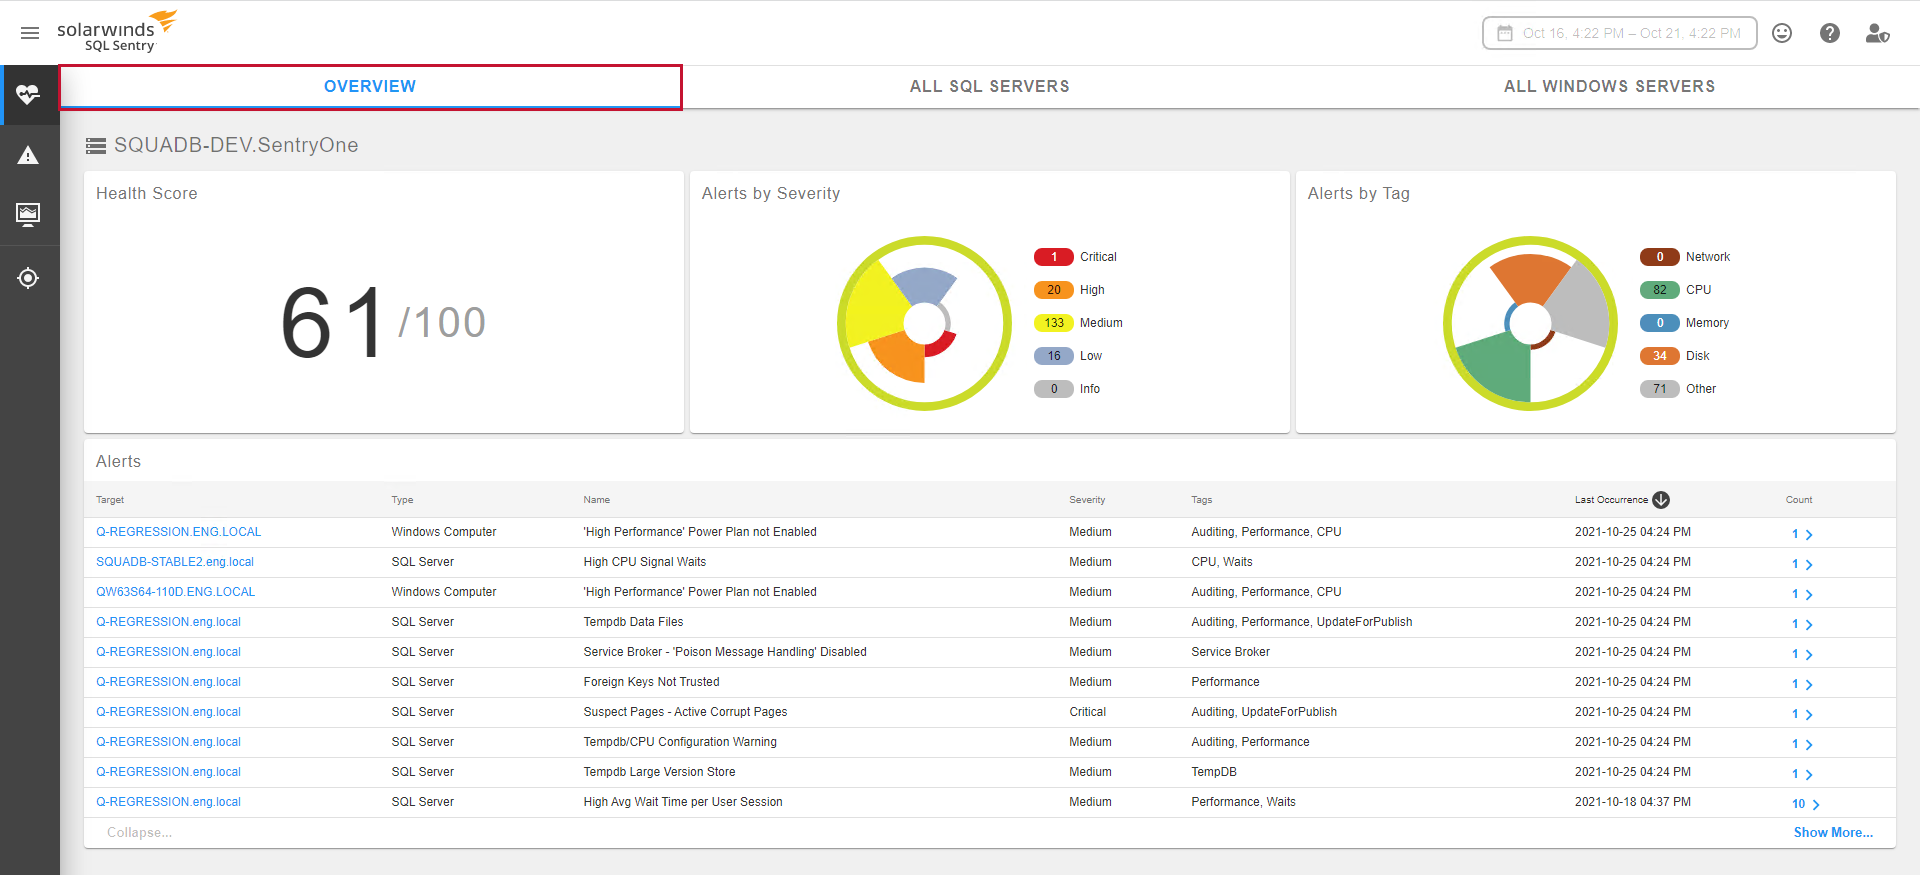 SQL Sentry Portal Overview displaying a 72/100 Health Score, Alerts by Severity and Tag, and a list of selectable Alerts.